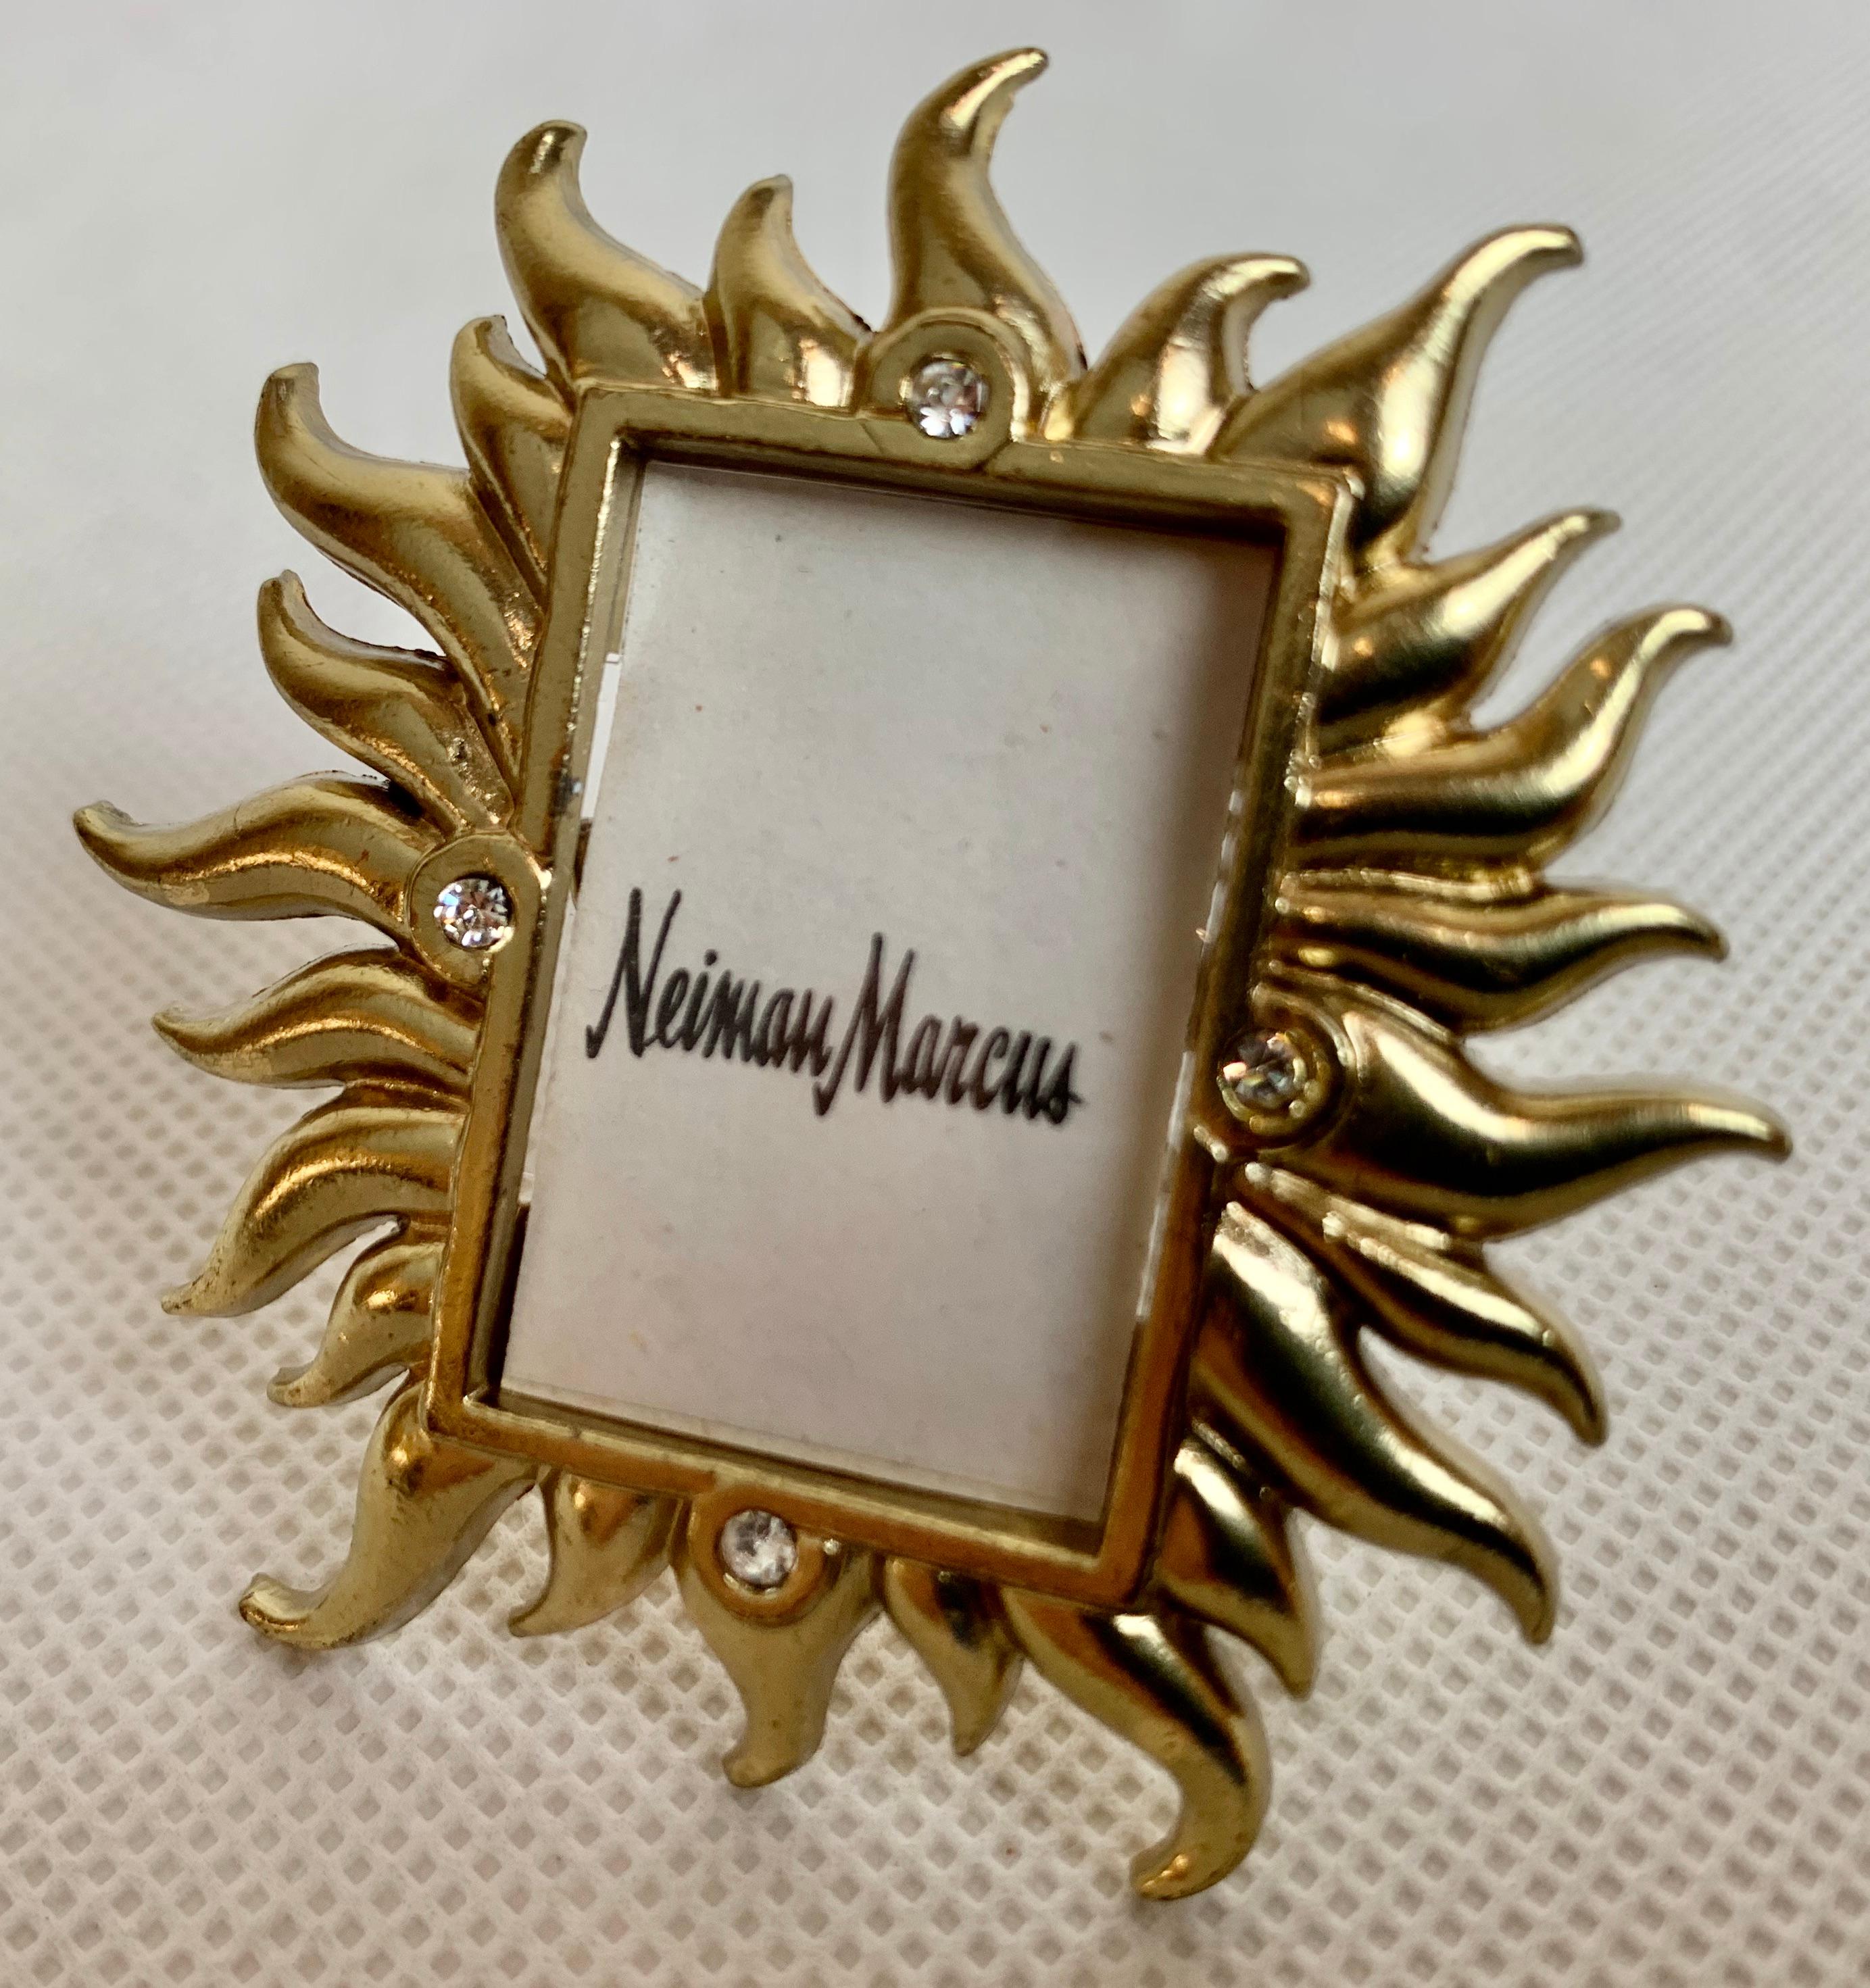 Jay Strongwater's mini golden sunburst frame for Neiman Marcus with Swarovski crystals was produced as a limited edition. It can be put on a flat surface with a photo. The back of the frame also has a strong clip that can be attached to any article